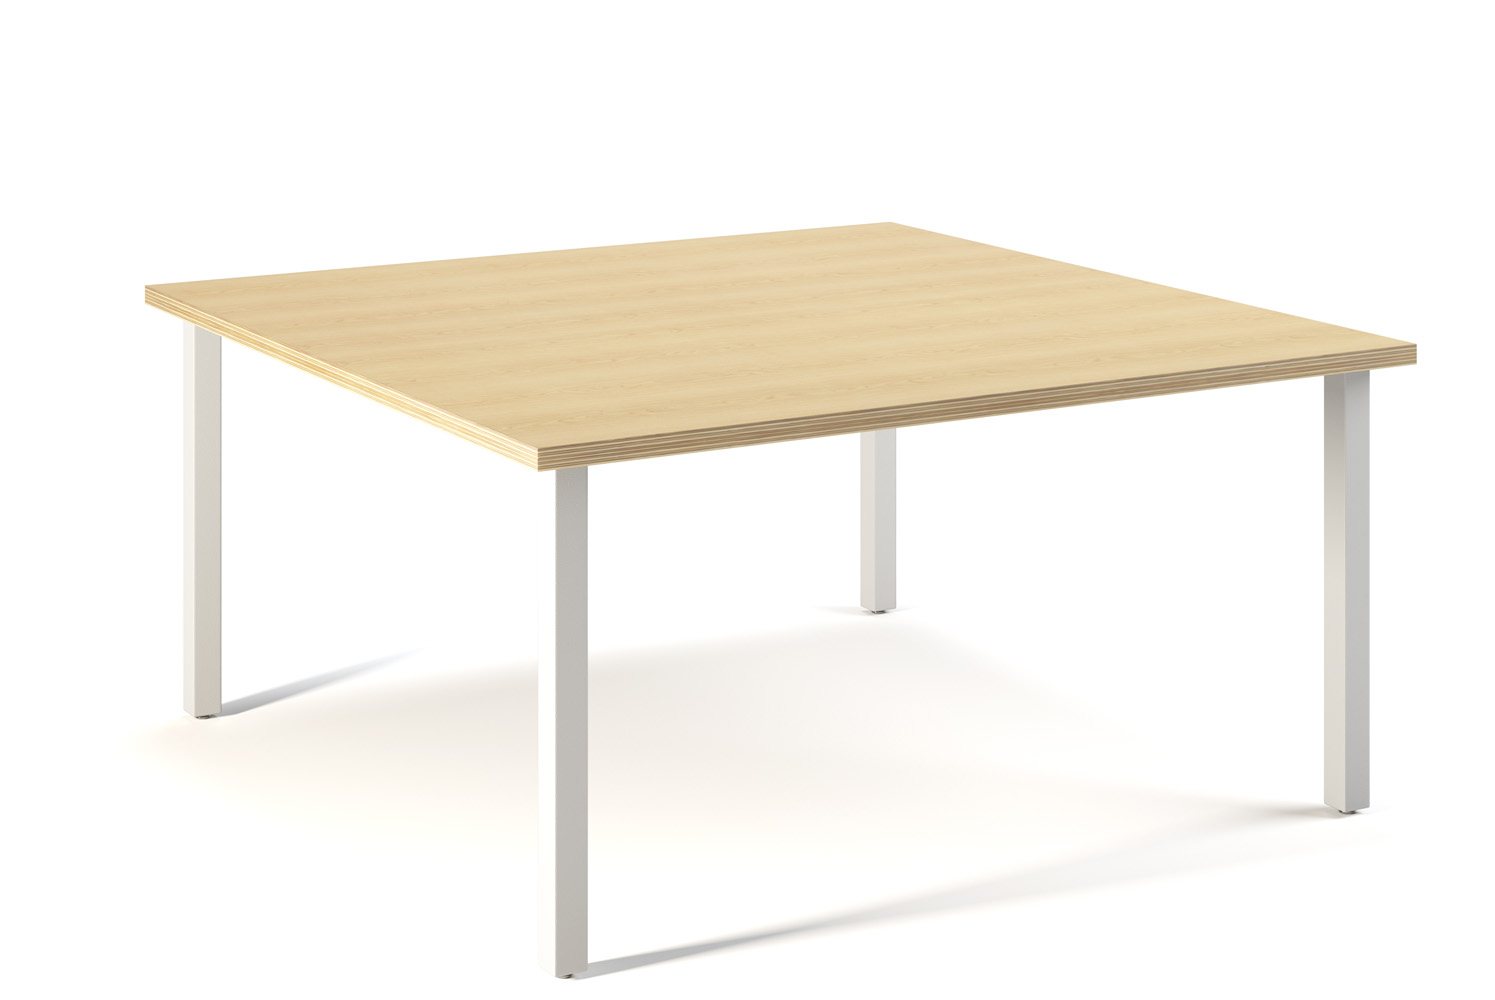 Post 60 Square Cafe Table